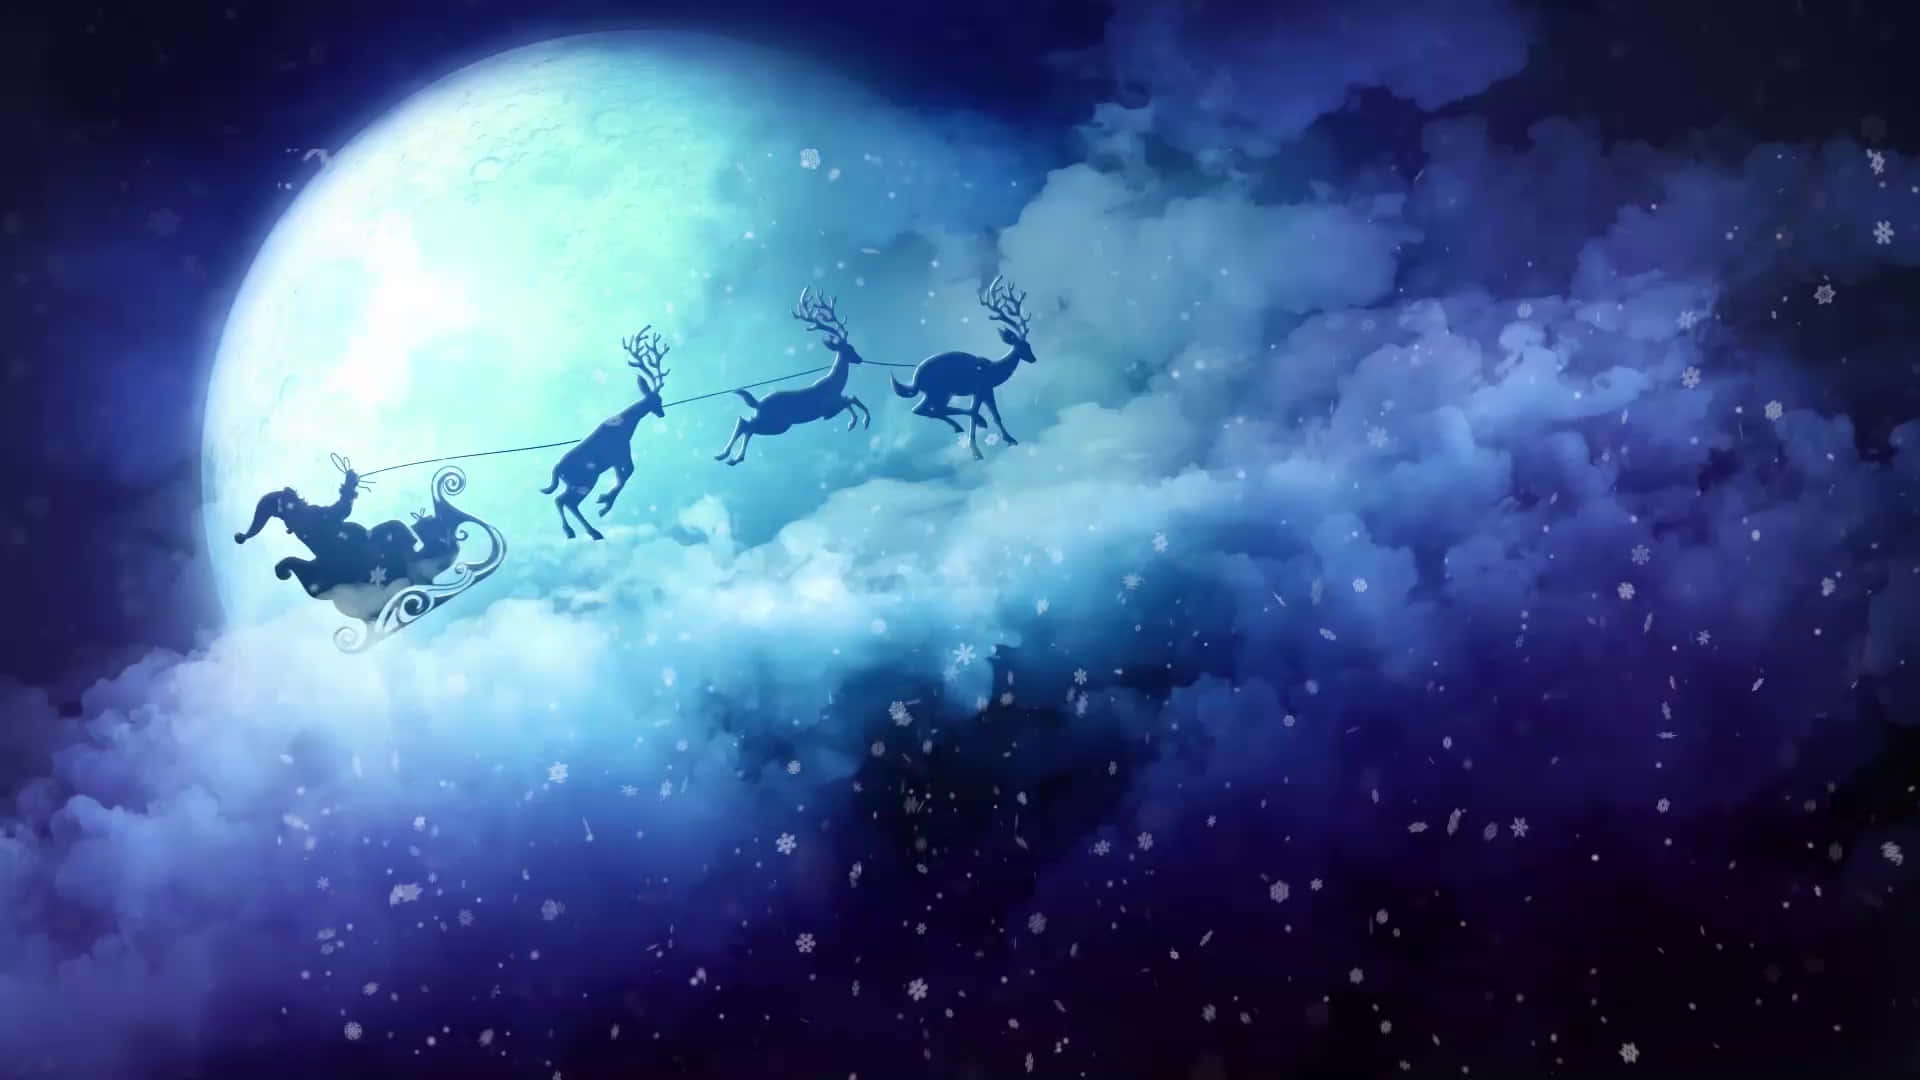 Santa Claus Flying Over The Moon With Reindeer